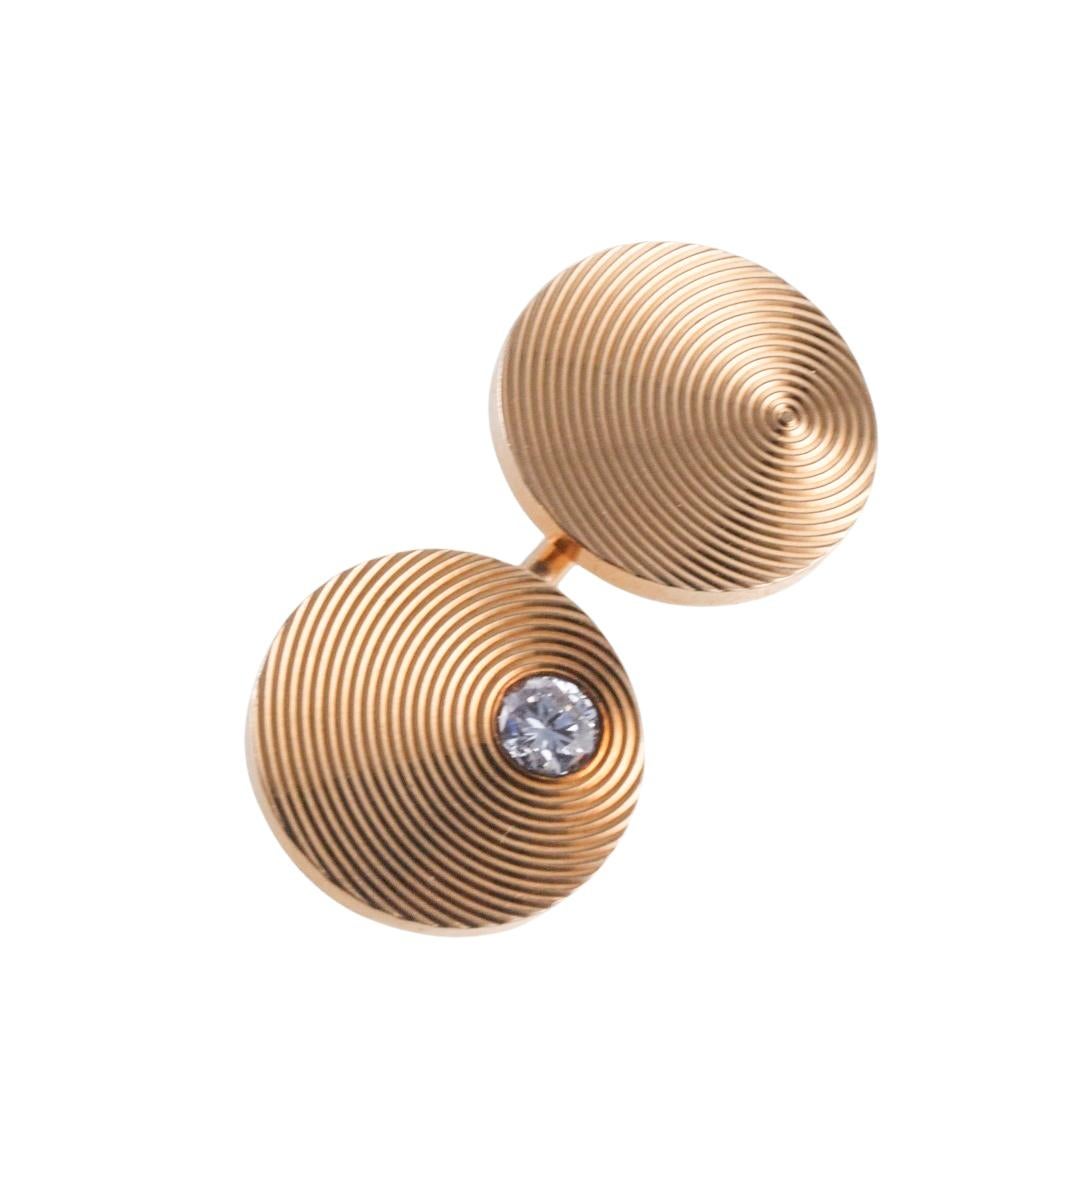 Retro Midcentury Gold and Diamond Cufflinks In Excellent Condition For Sale In New York, NY